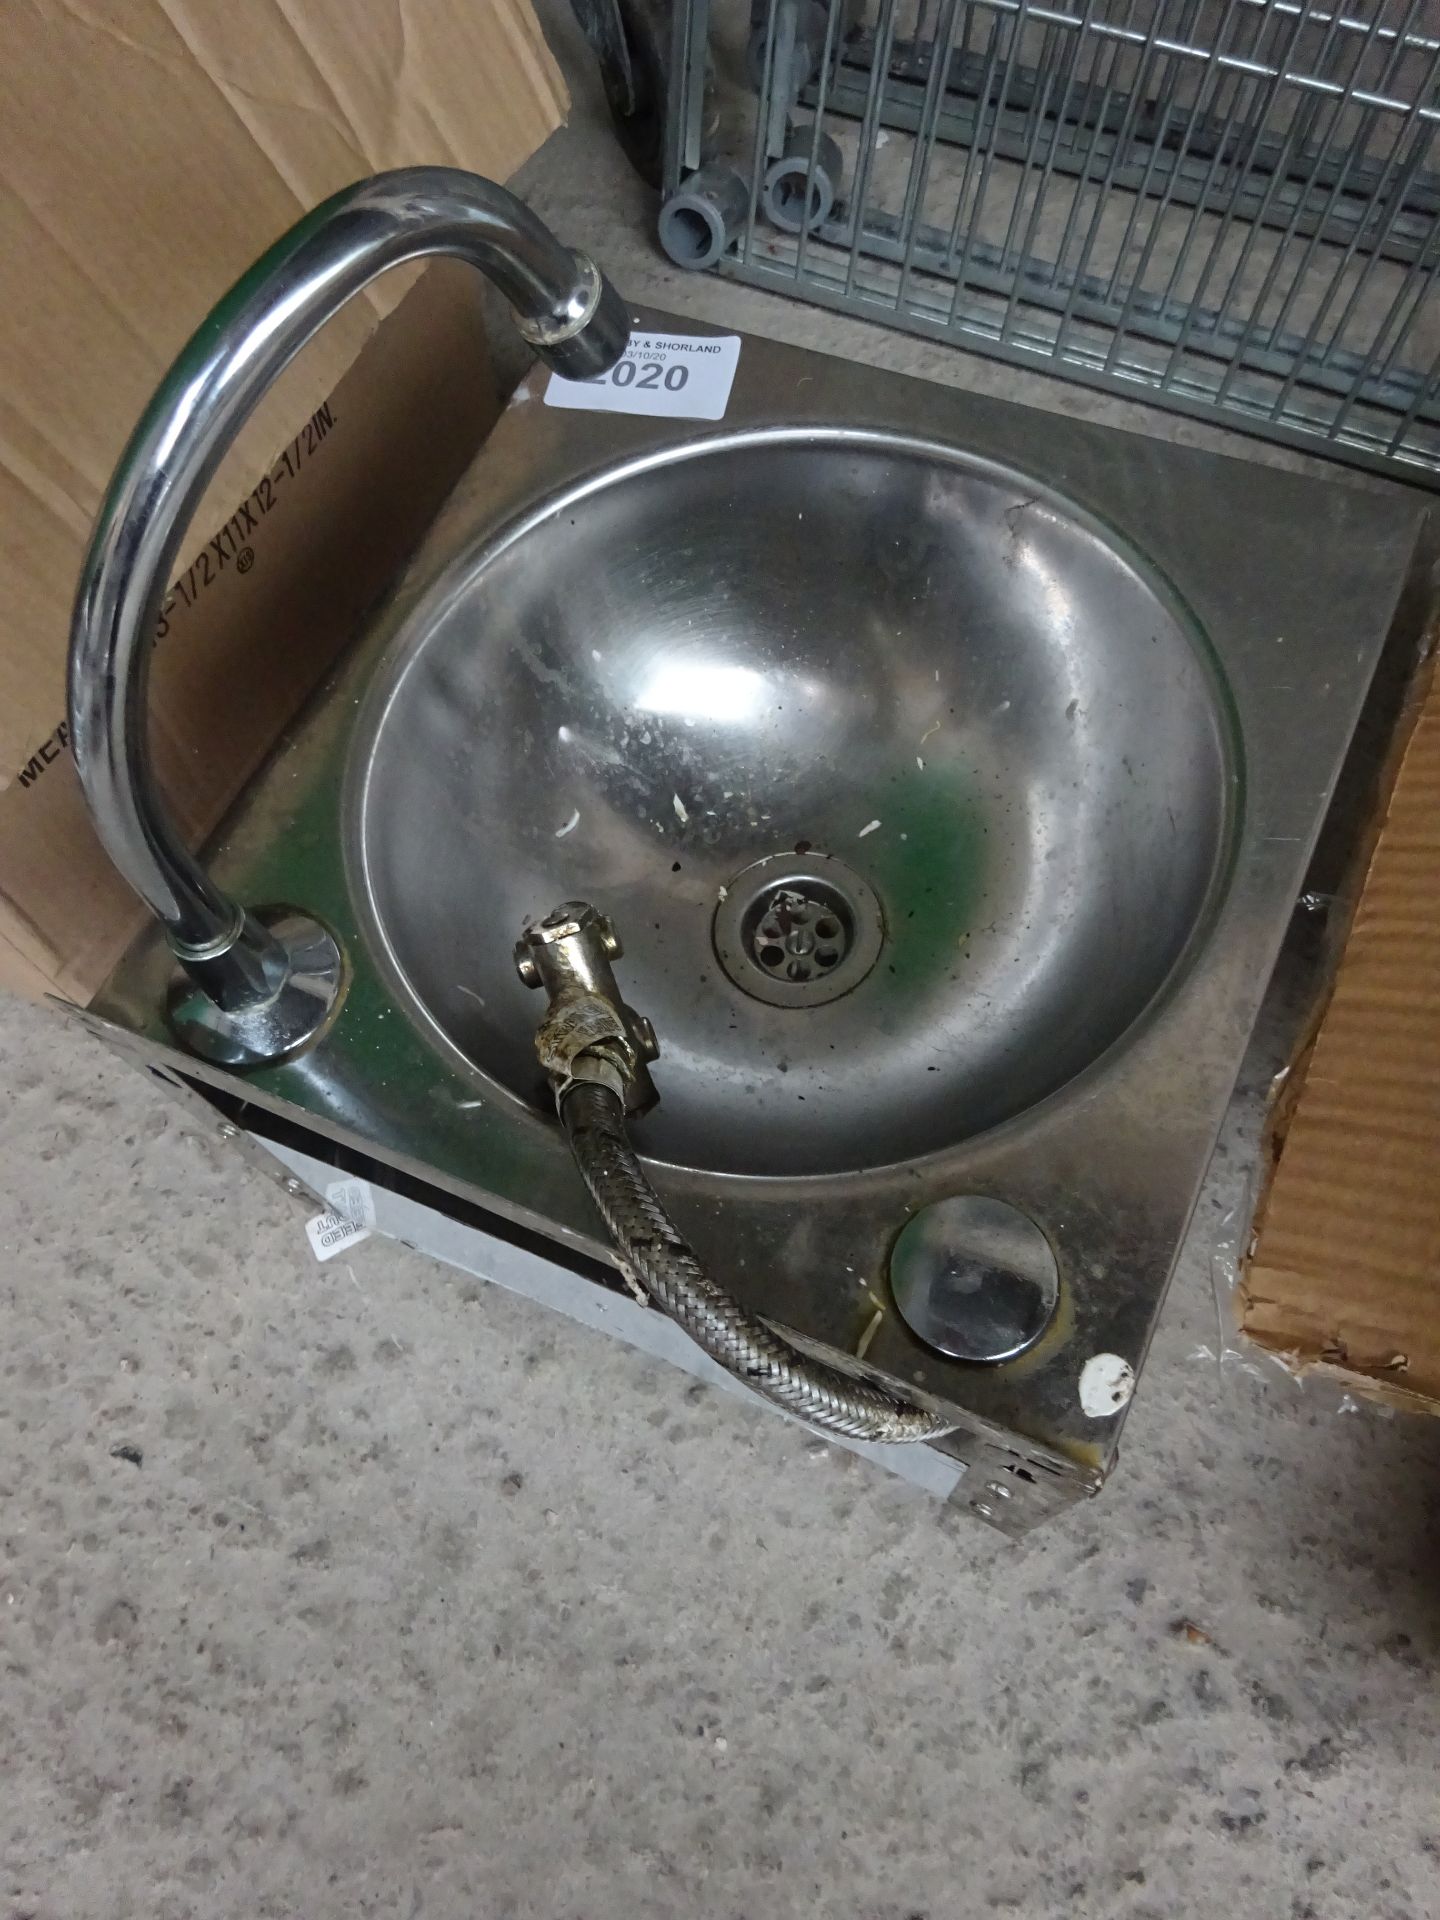 Stainless steel hand sink with tap